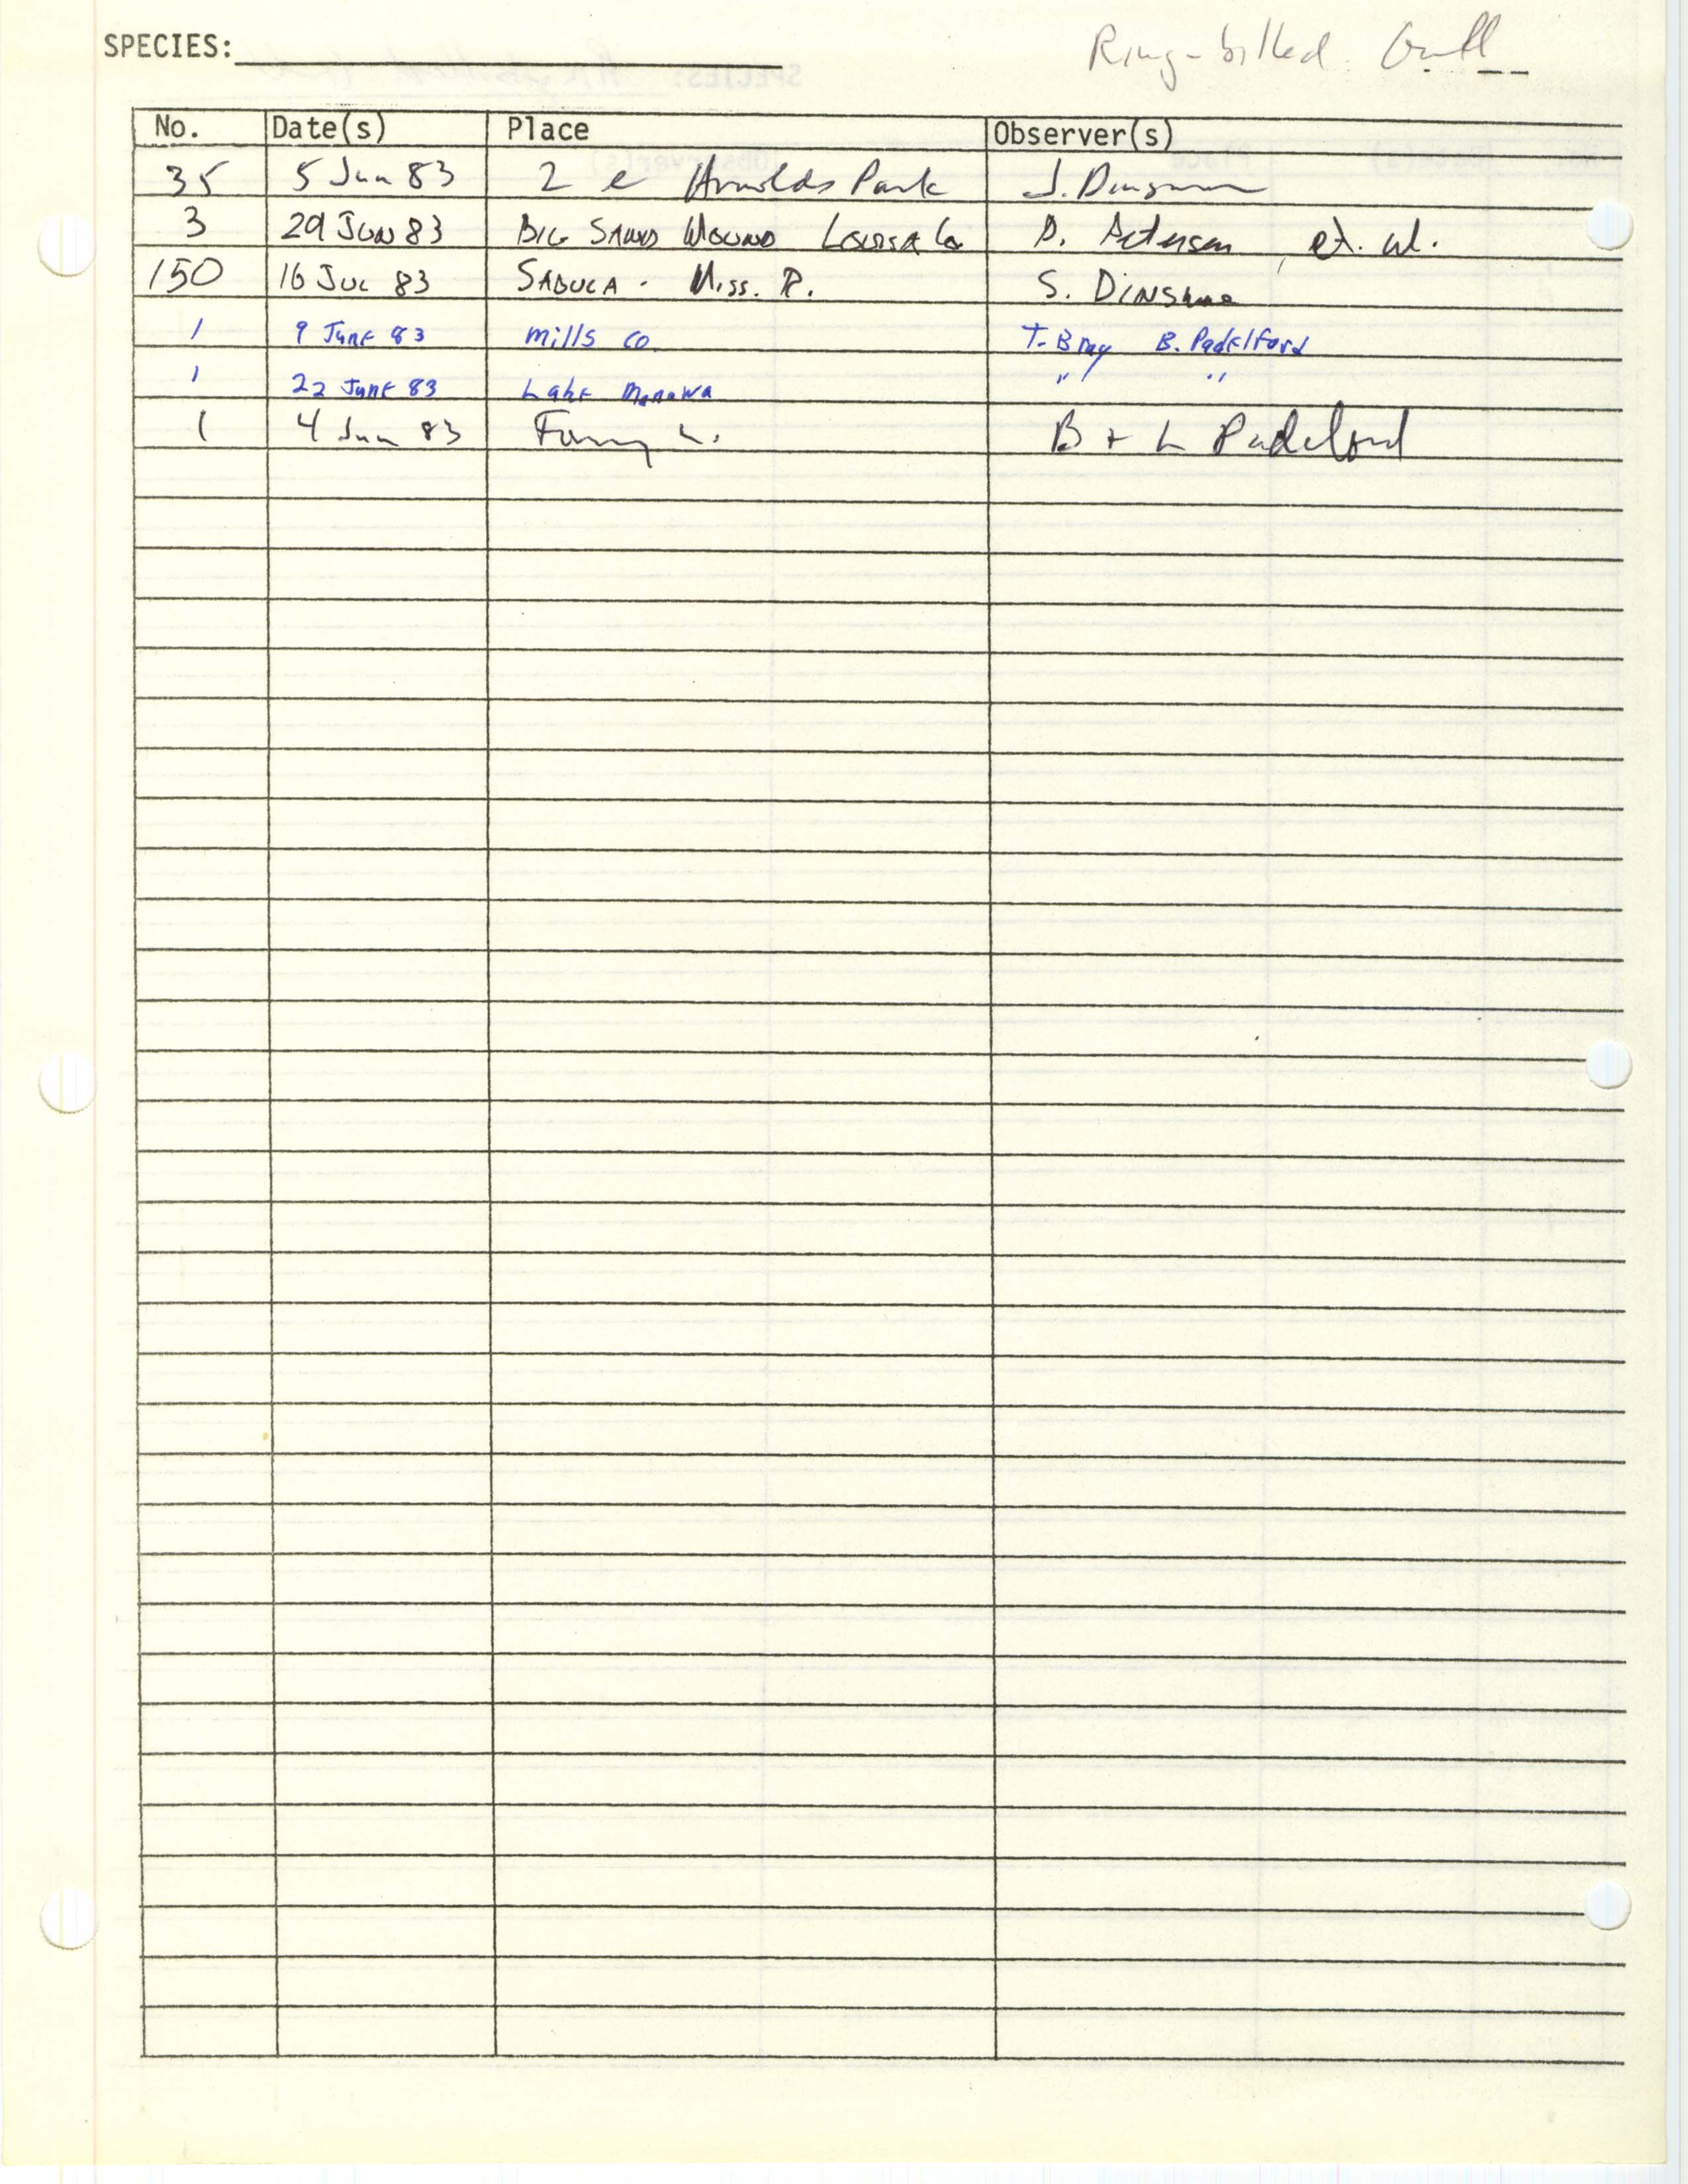 Iowa Ornithologists' Union, field report compiled data, Ring-billed Gull, 1983